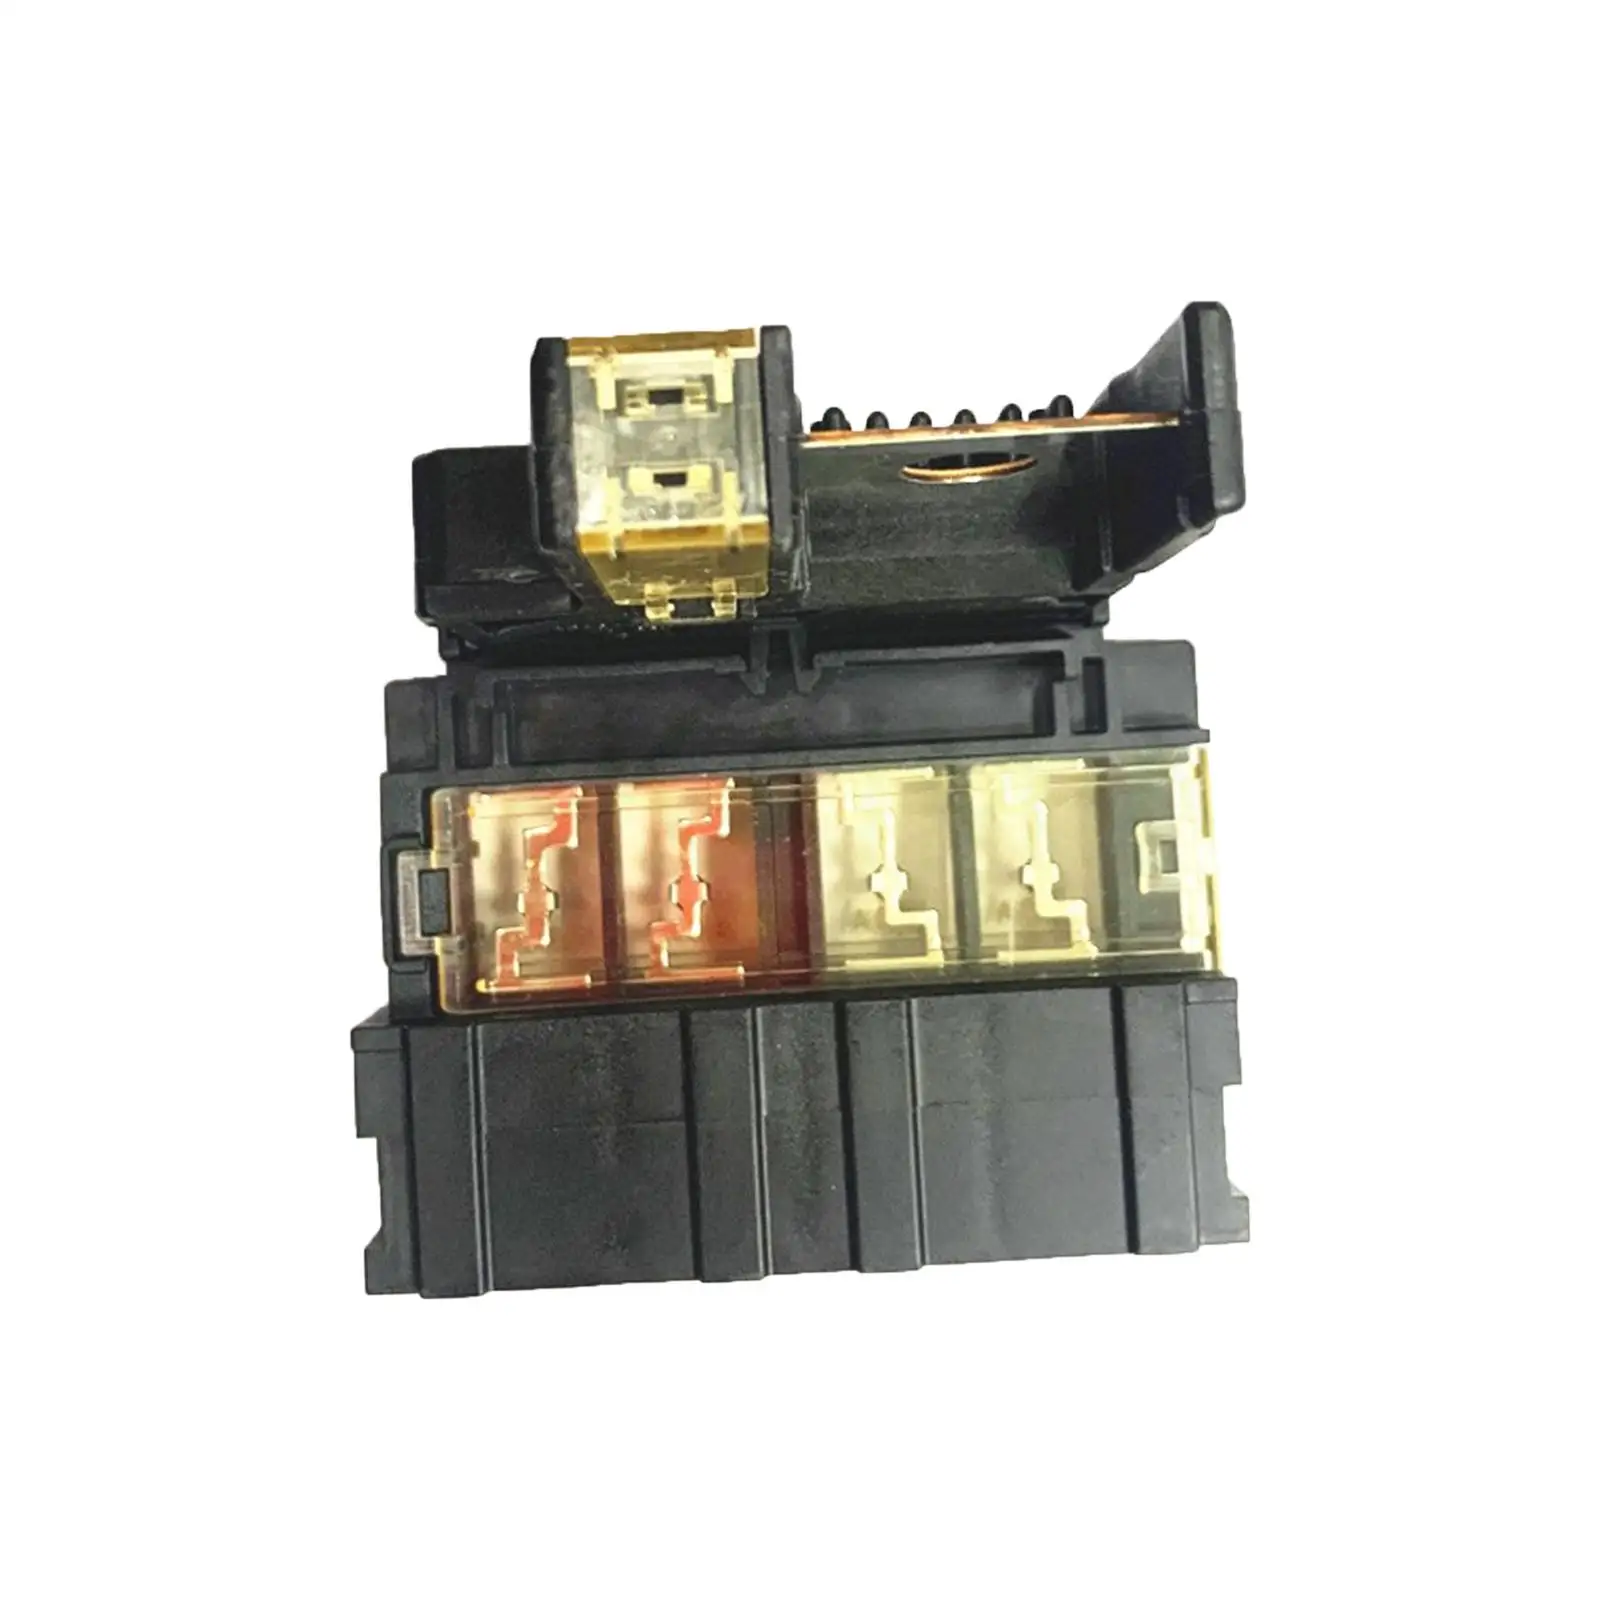 24380-79912 High Performance 24380-79919 24340-ja74A 24380-7994A Battery Fuse Durable for Suzuki Swift 2005-2010 SX4 09-13